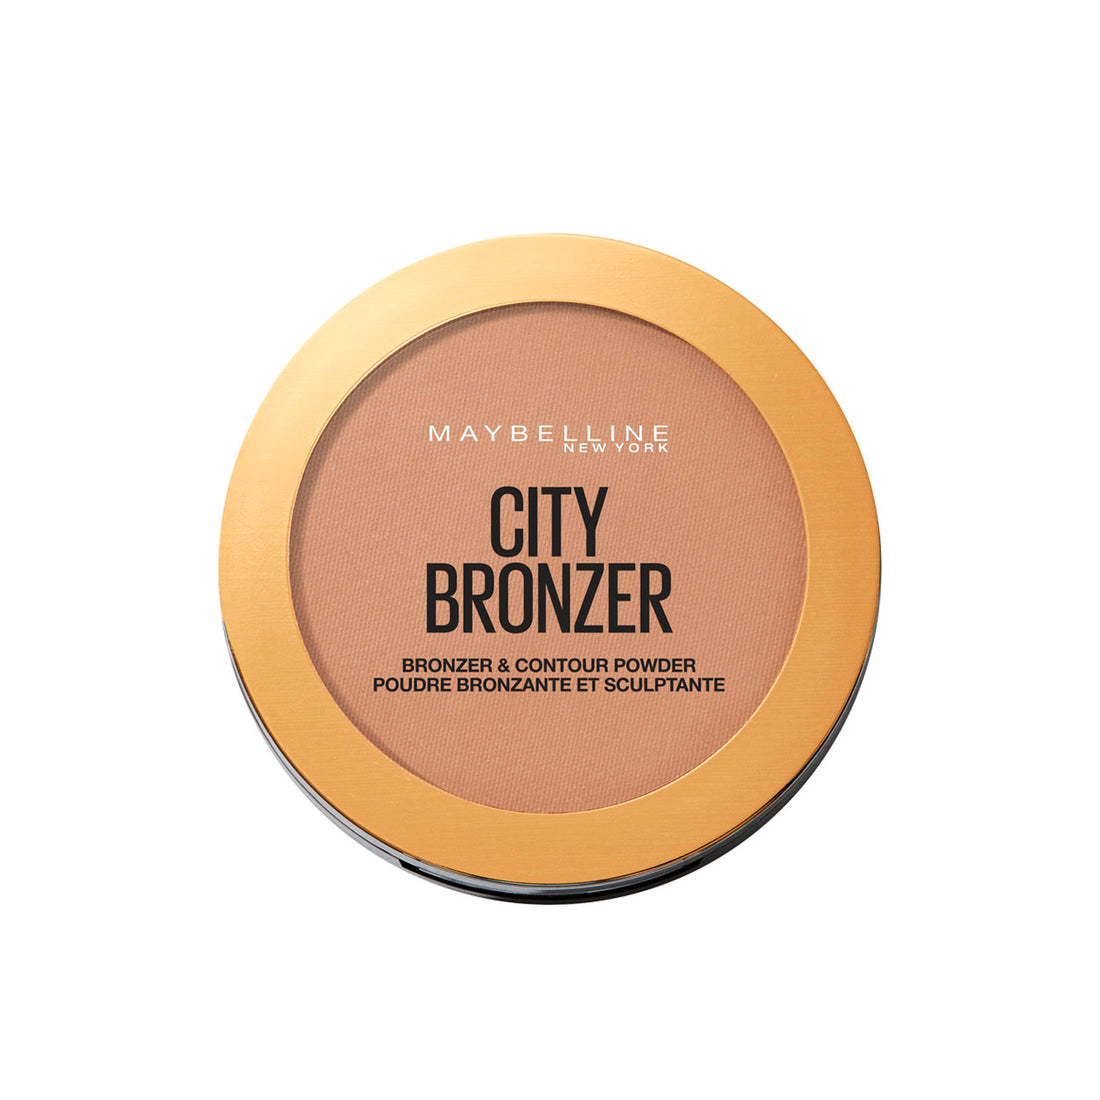 Maybelline City Bronzer Poudre Bronzage Nº 300 Deep Cool